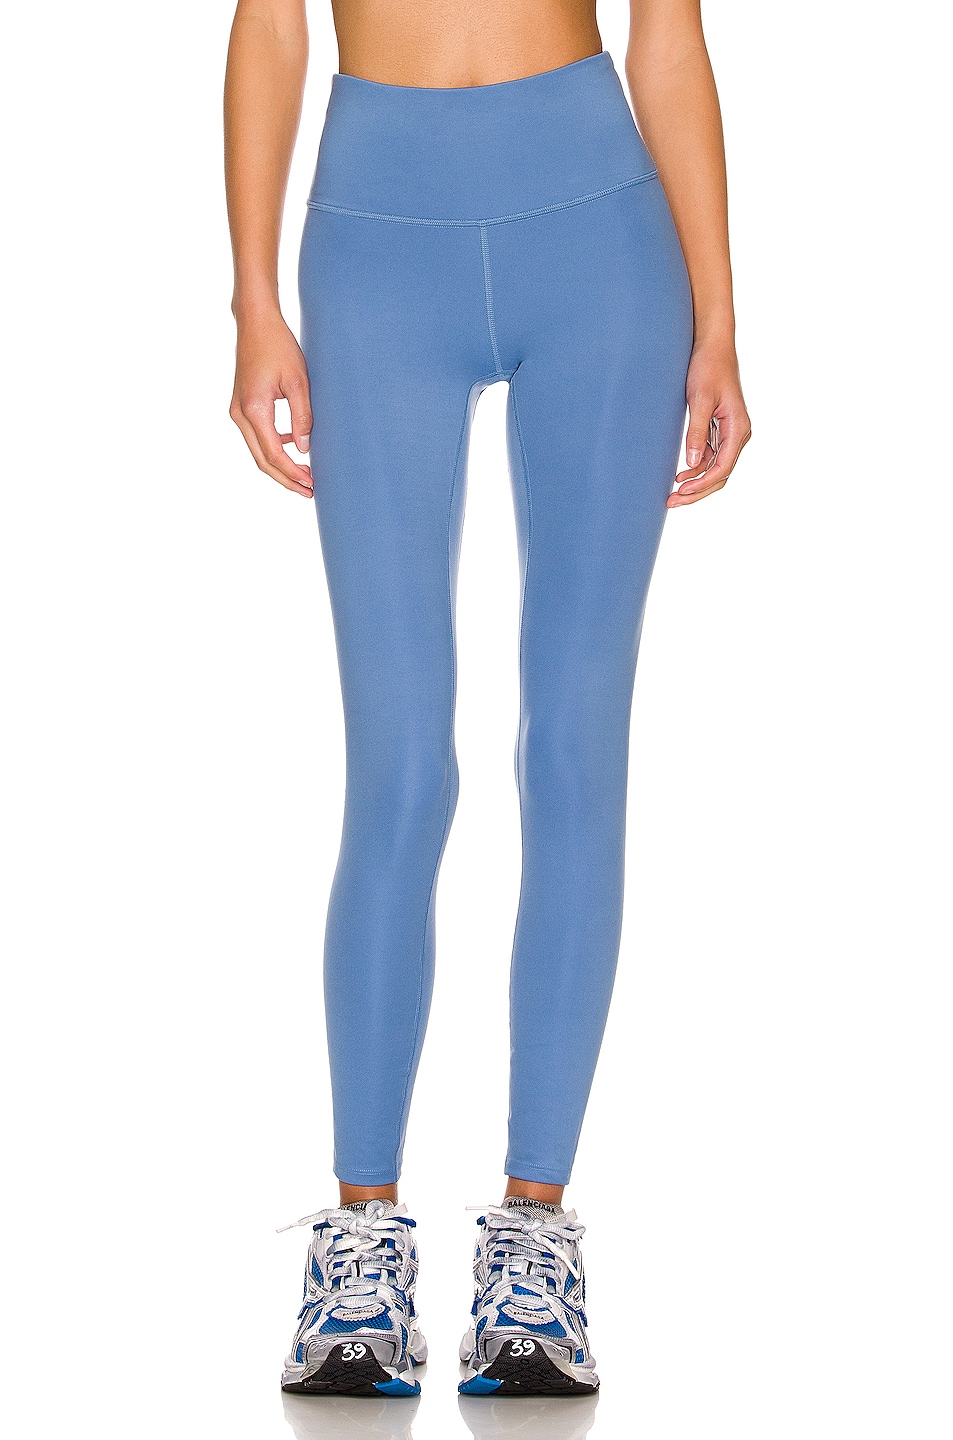 Image 1 of Varley Let's Move High 27" Legging in Flint Stone